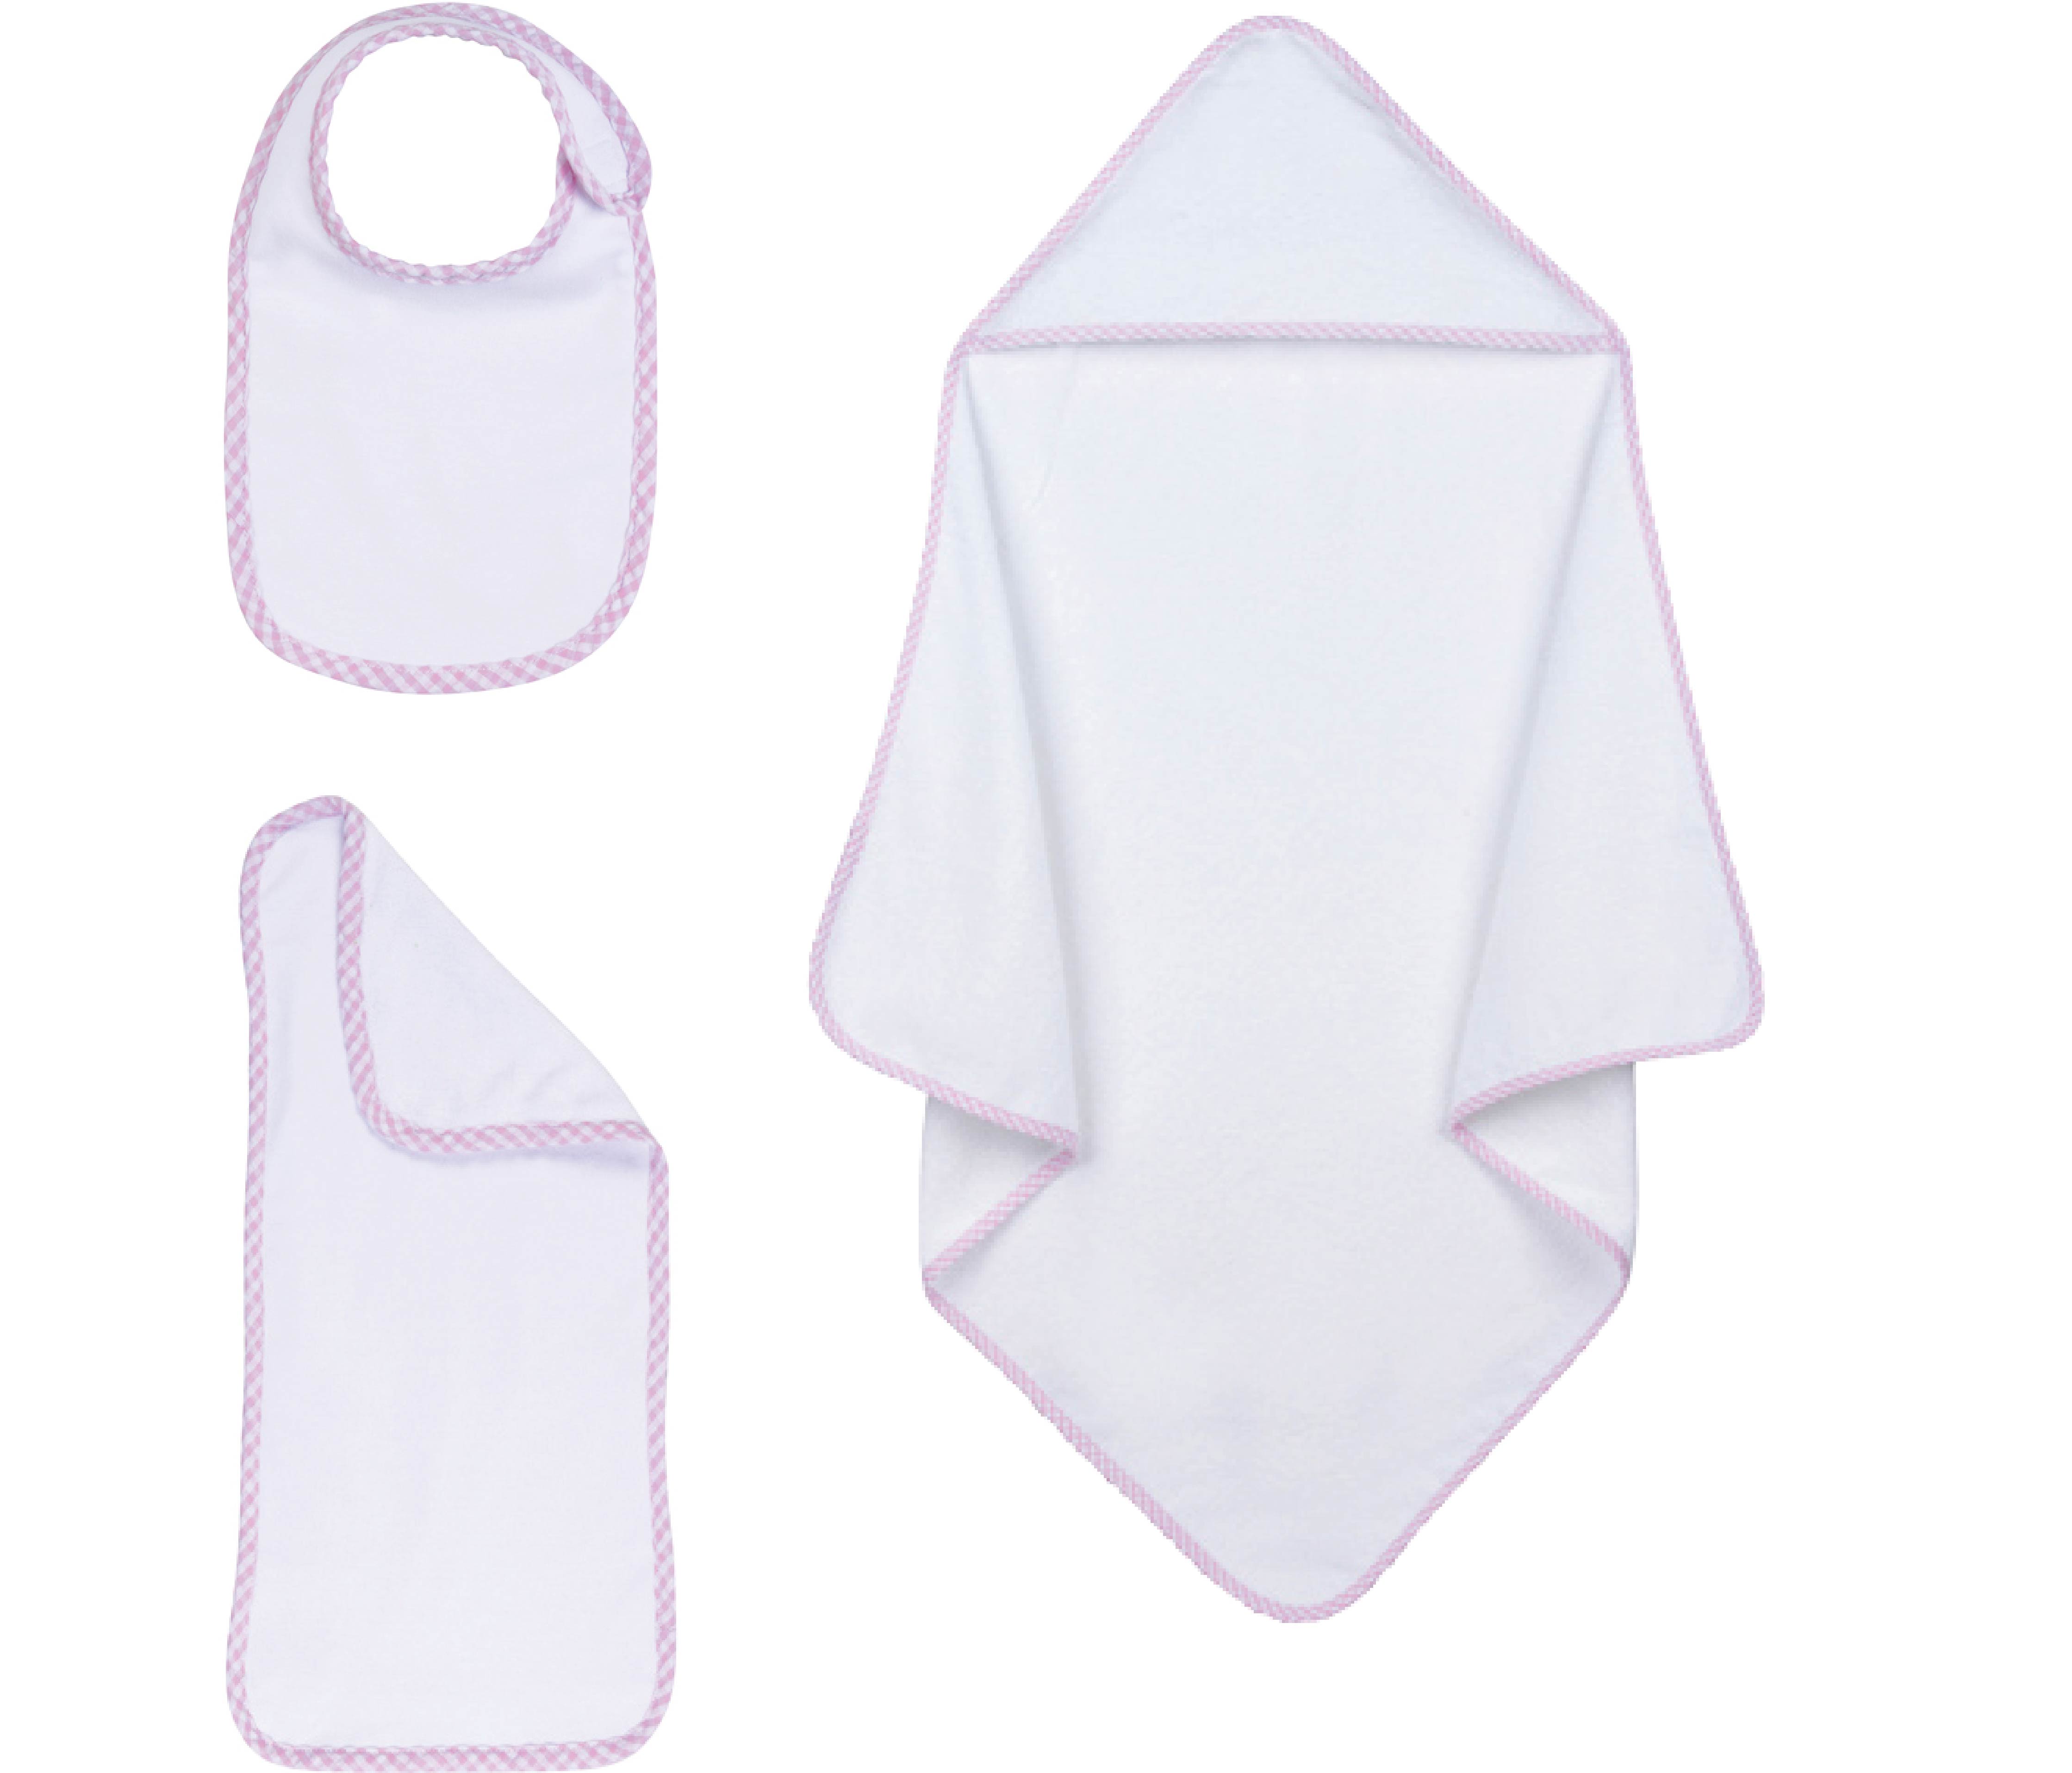 Embroidery Blank Set (Bib, Burp Cloth and Hooded Towel with Pink Gingham Border)